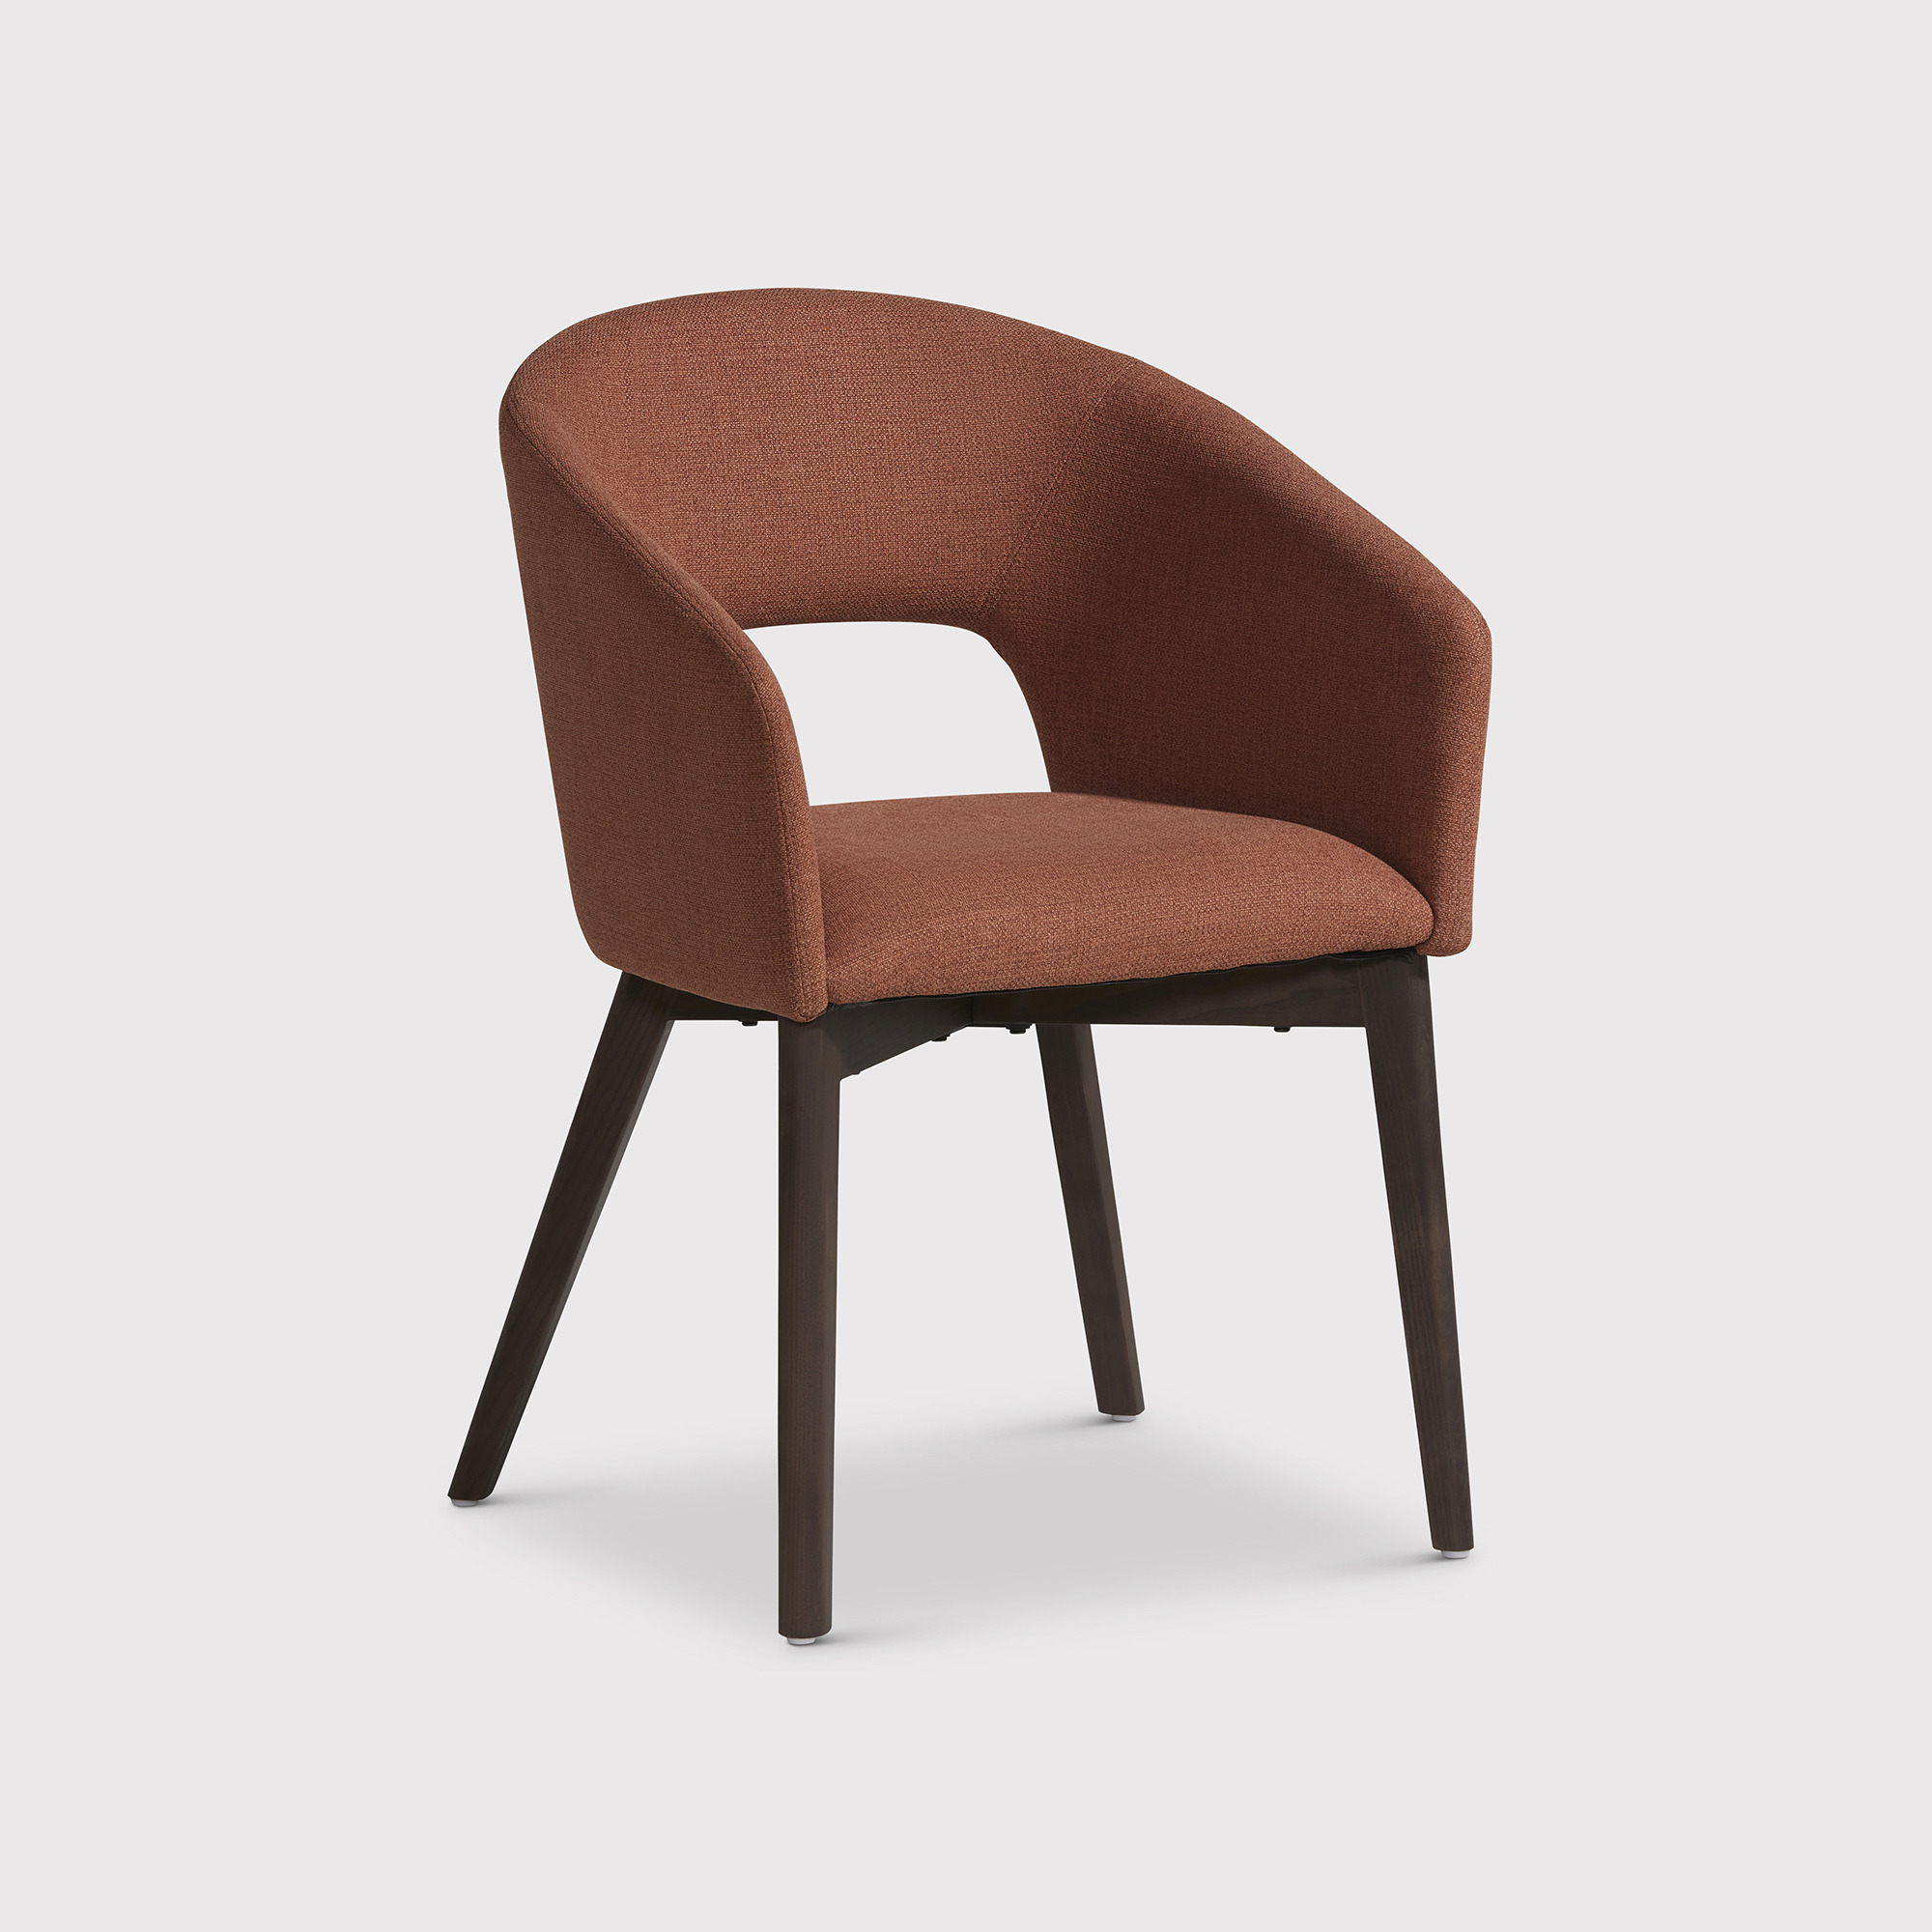 Tish Dining Chair, Brown - Barker & Stonehouse - image 1